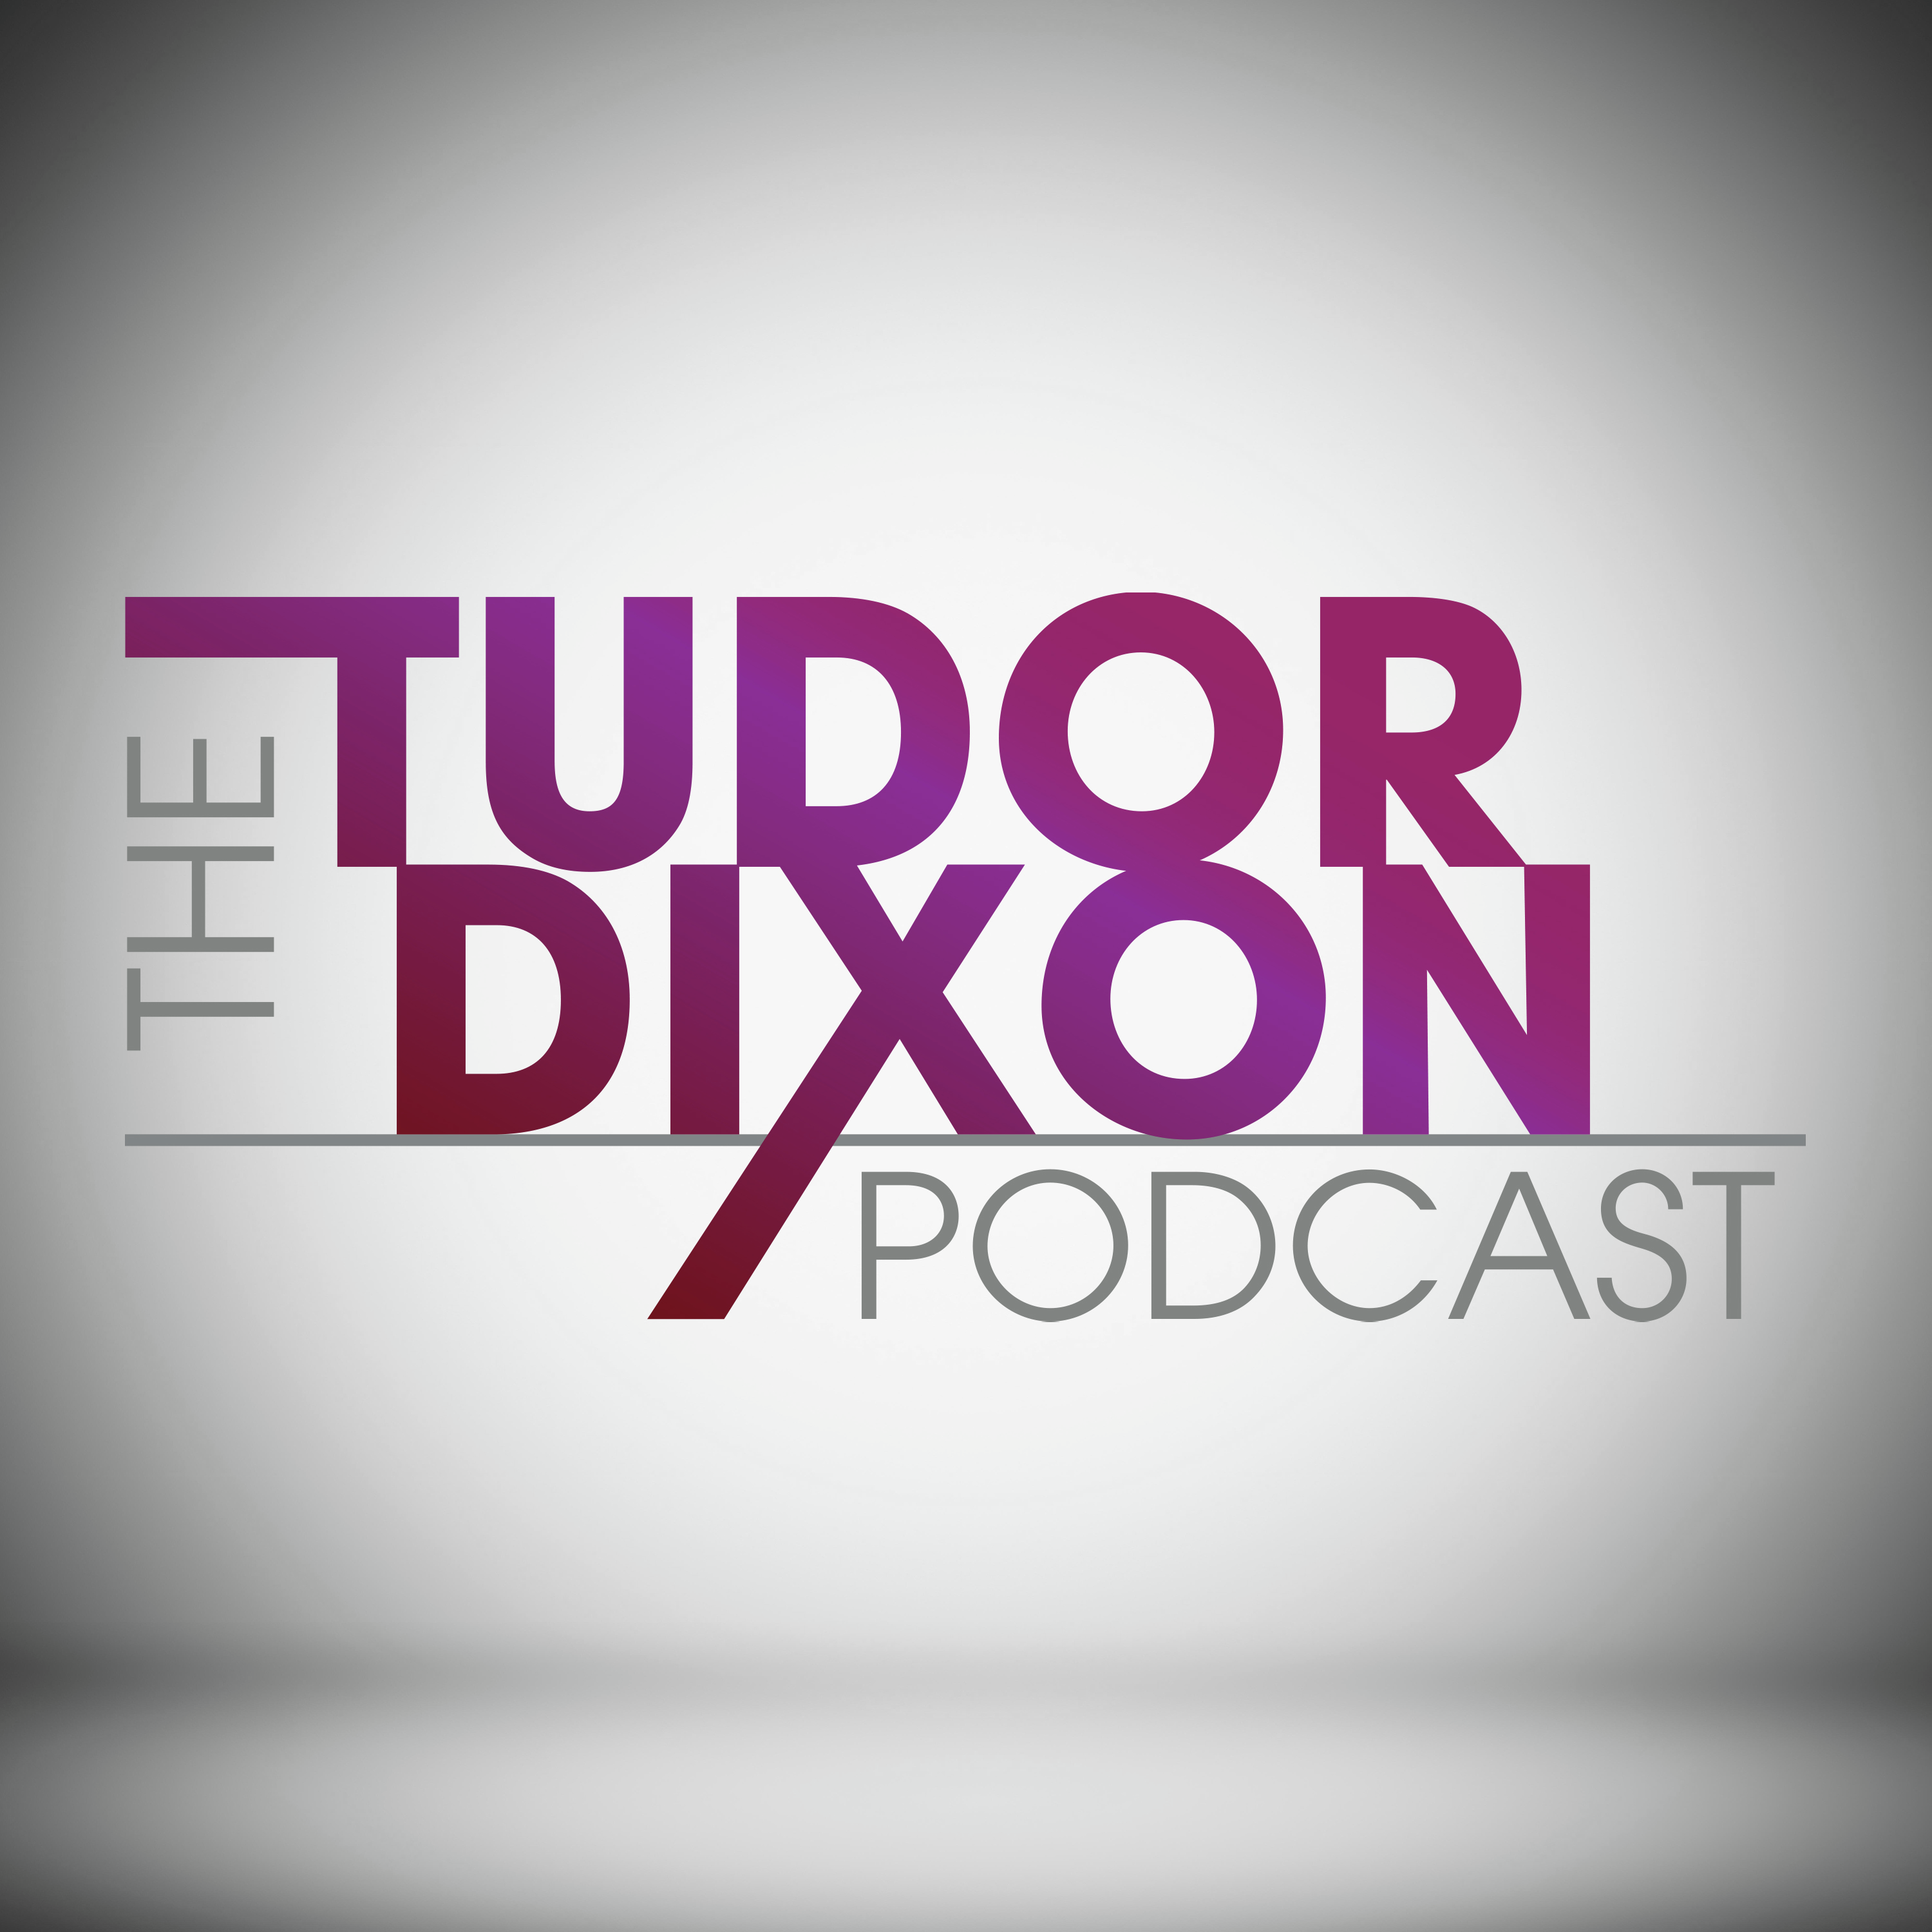 The Tudor Dixon Podcast: Xi Jinping and the Threat to American Values with Lily Tang Williams